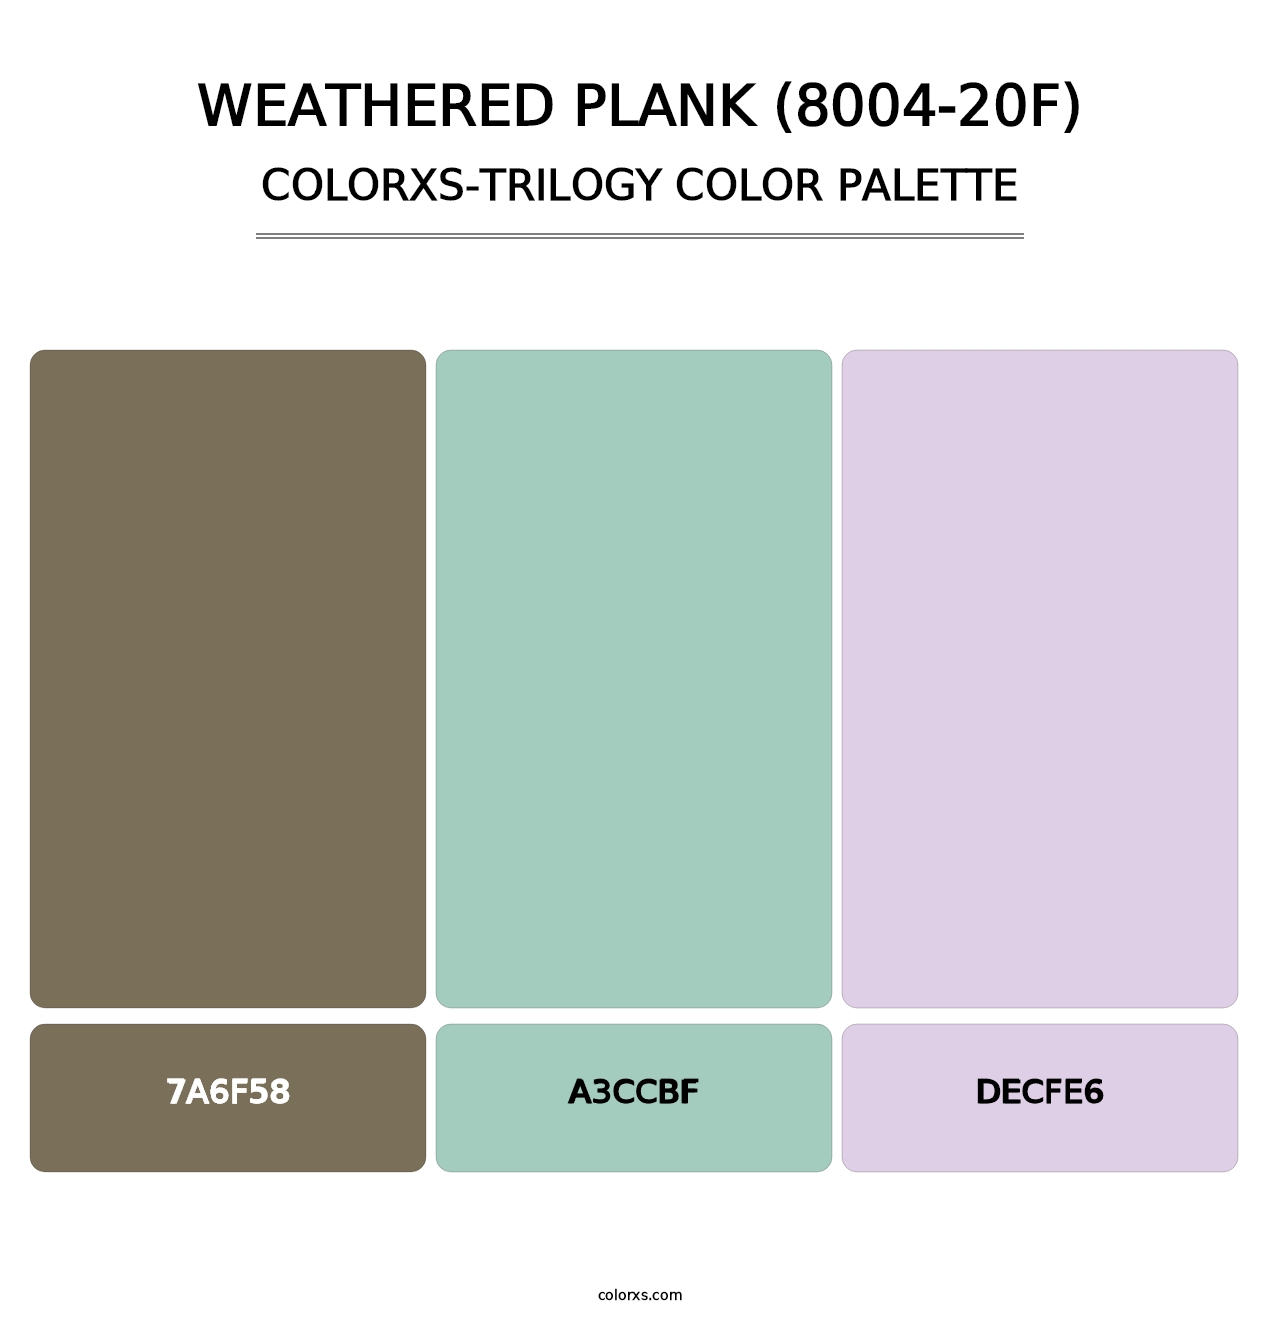 Weathered Plank (8004-20F) - Colorxs Trilogy Palette